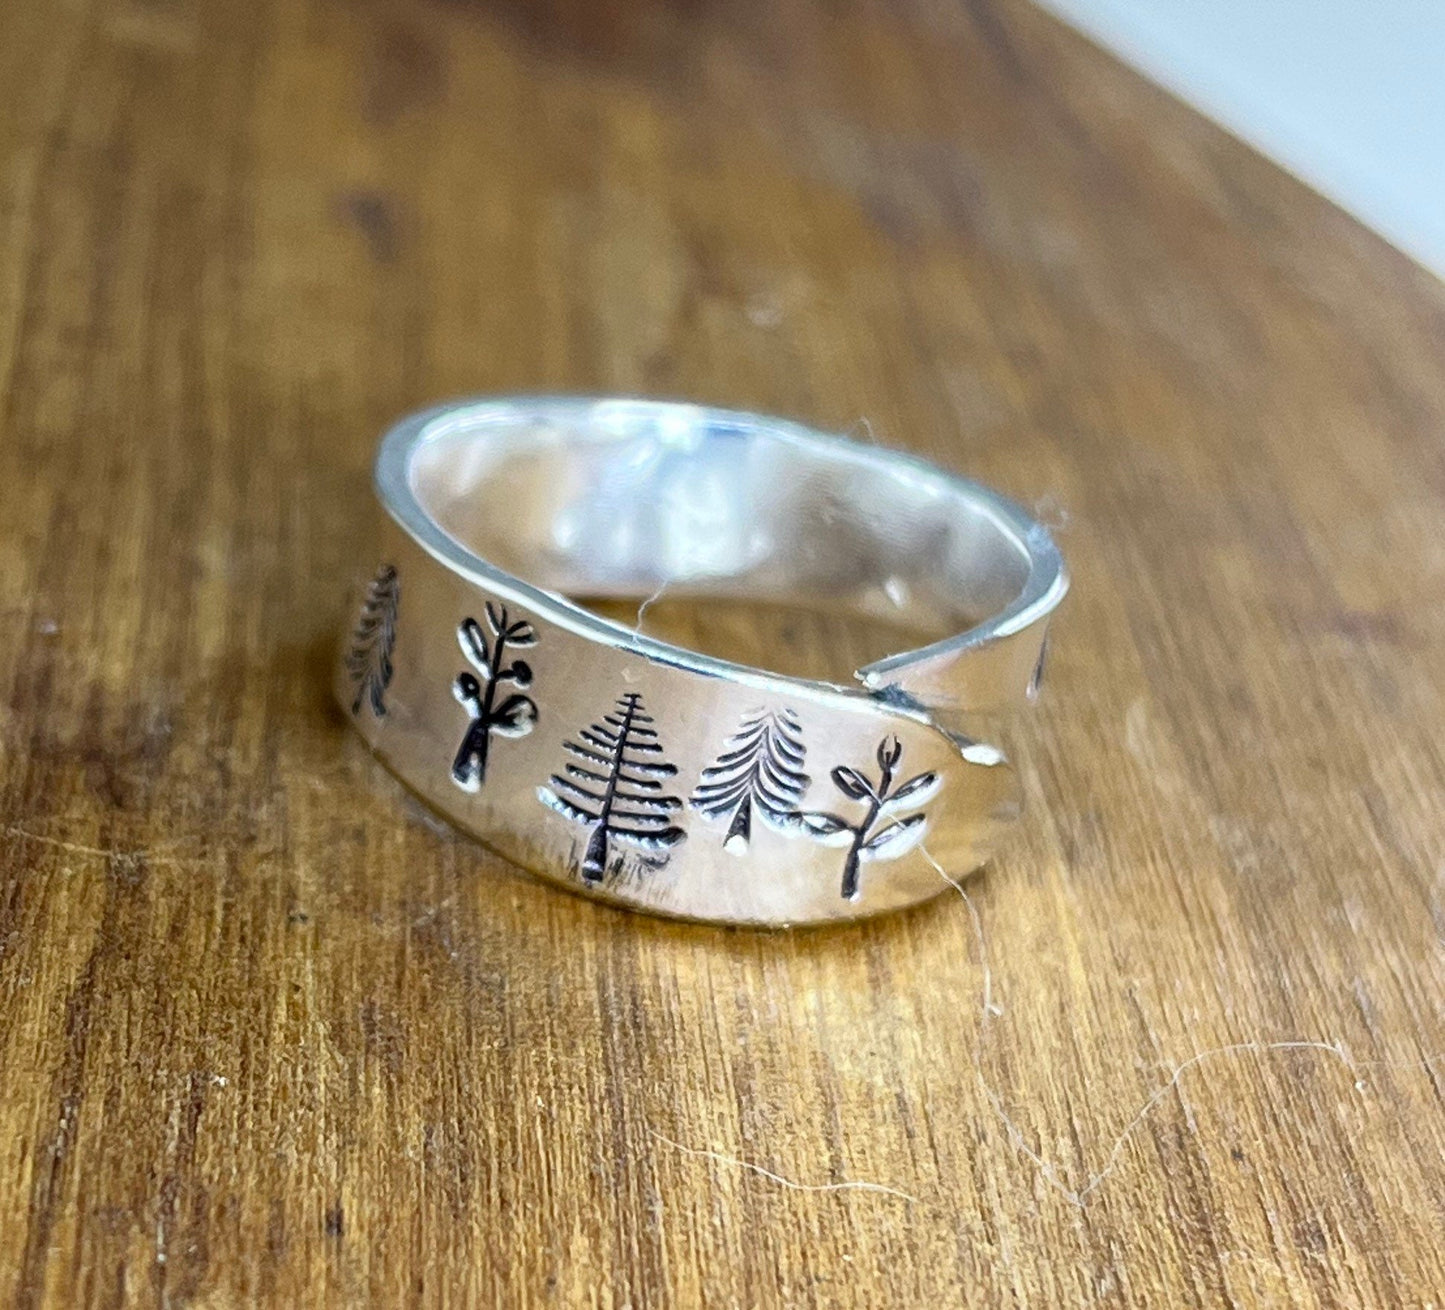 Silver Wrap Ring made from Vintage Silver plated fork tine with trees and mountains hand stamped around, Silverware Jewelry, Spoon ring,